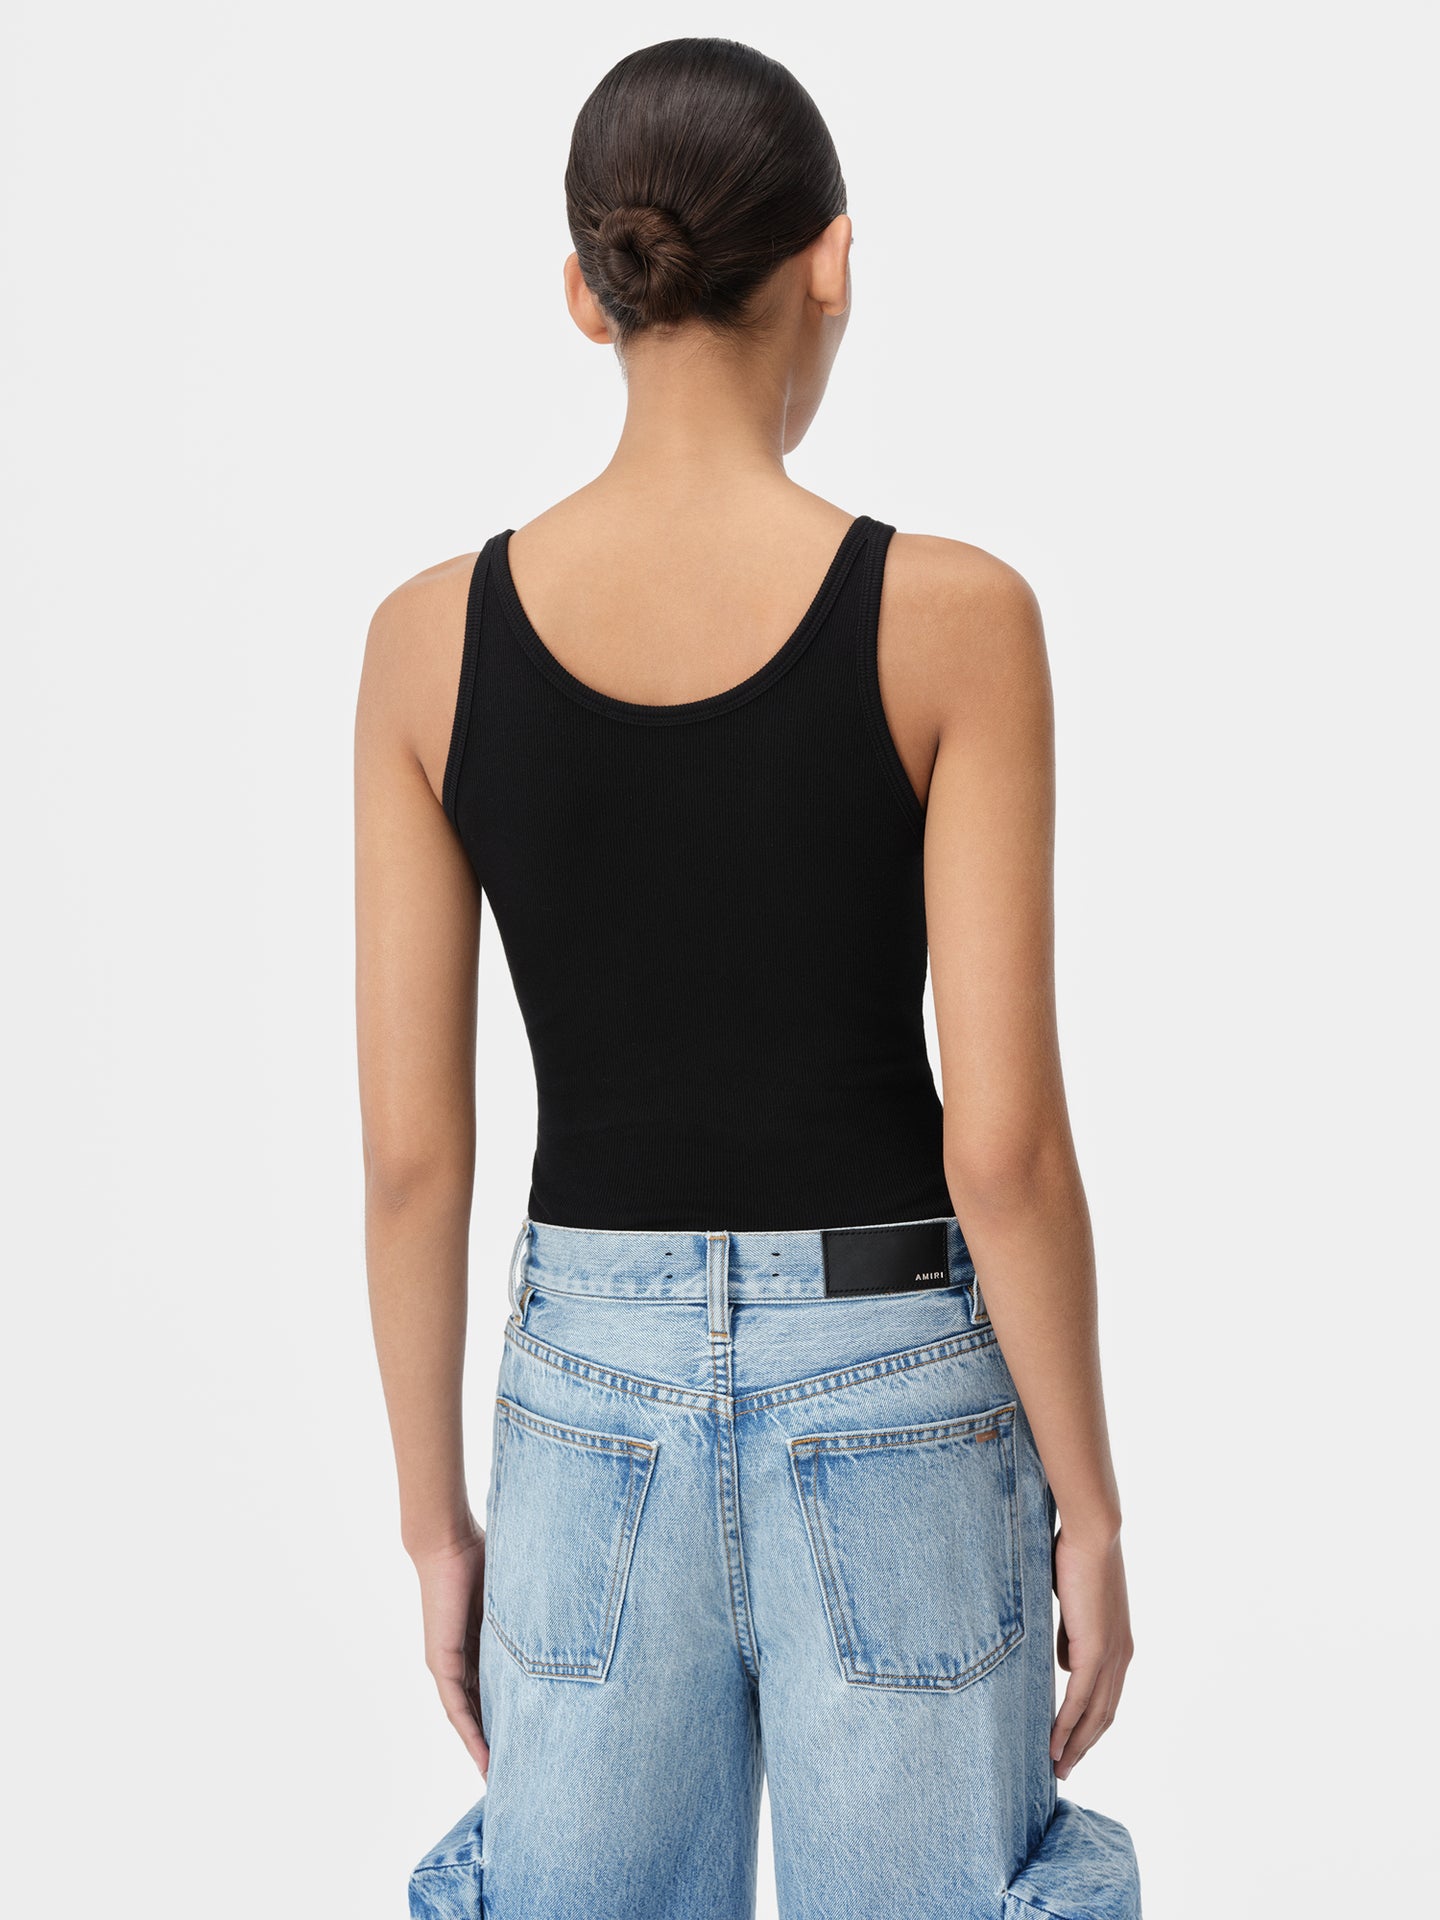 WOMEN - MA EMBROIDERED RIBBED TANK - Black